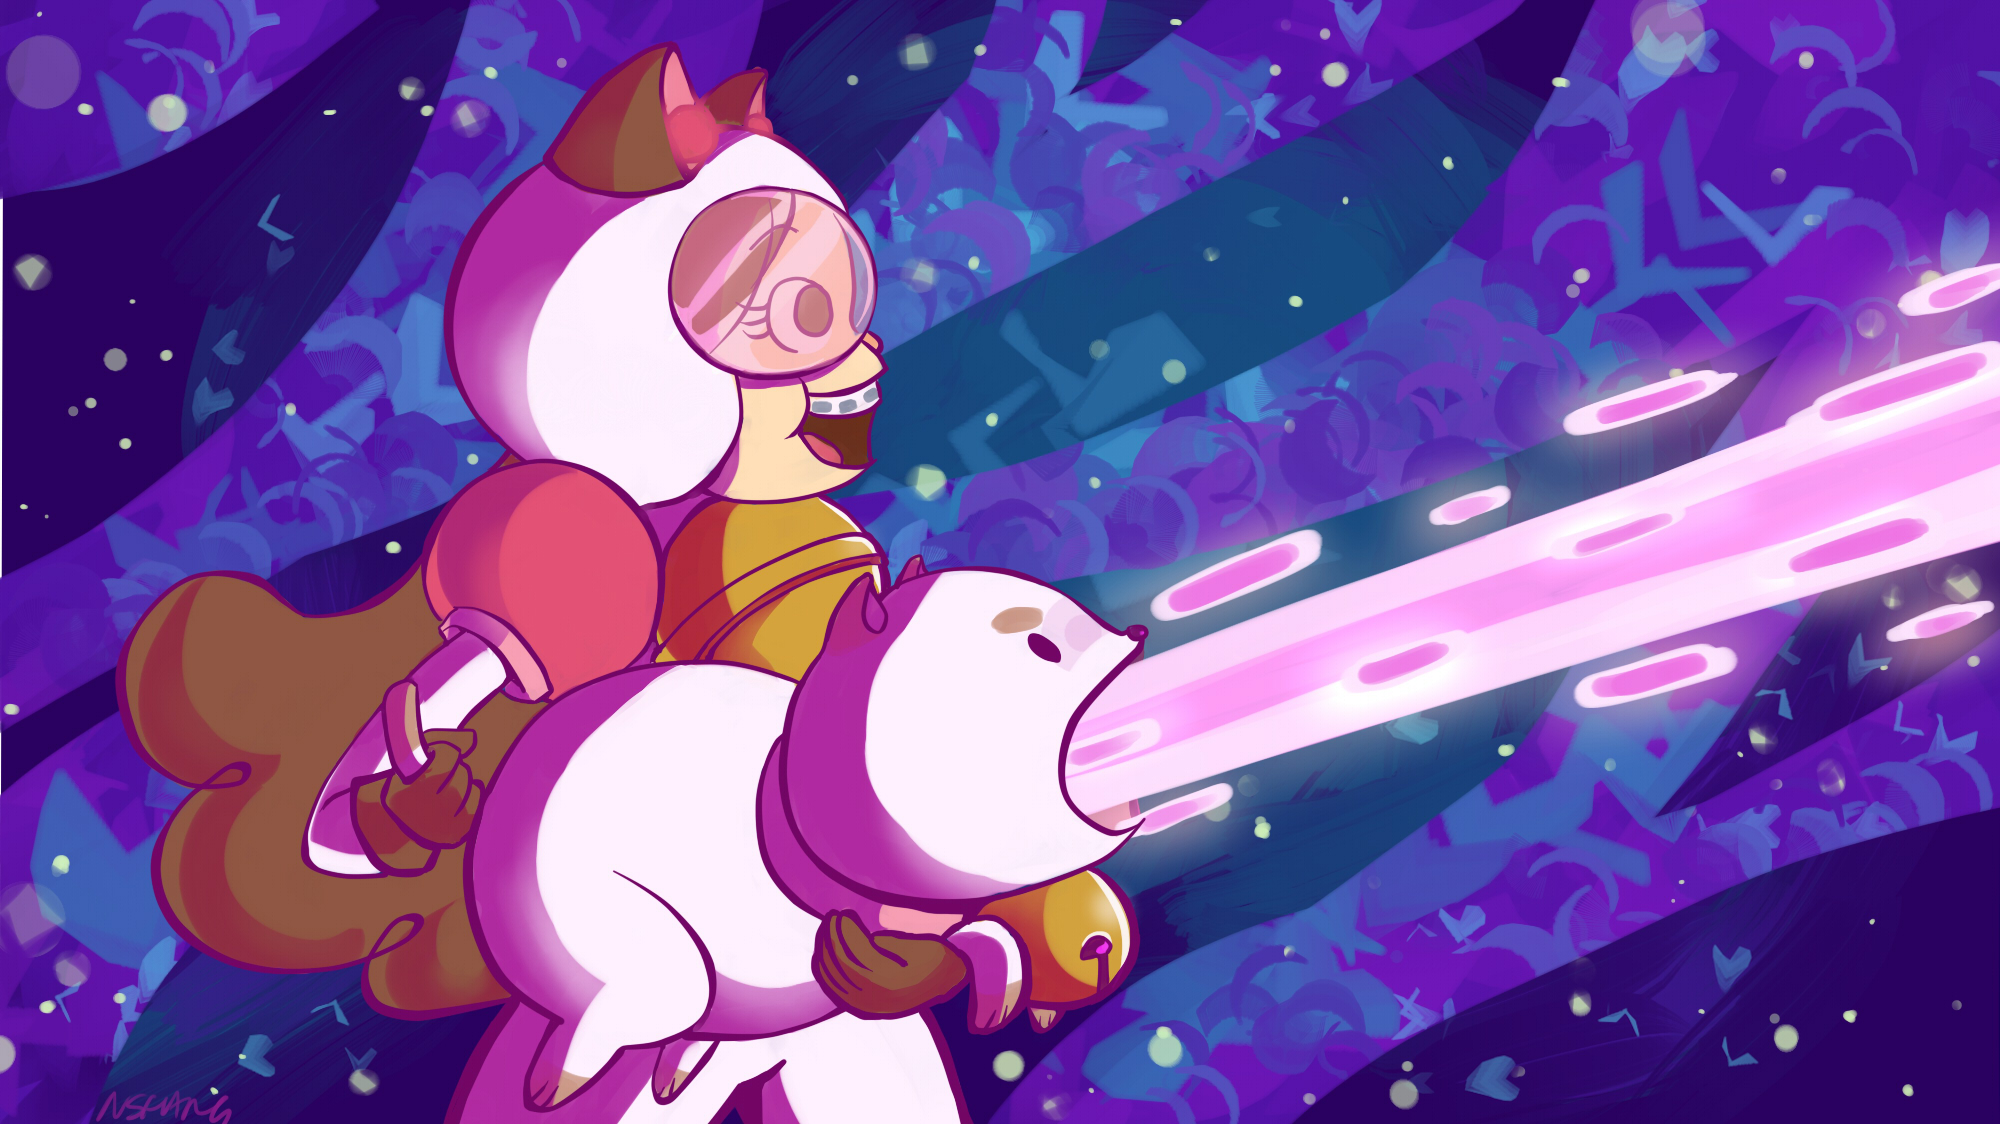 Mabee And Puppycat by nschang